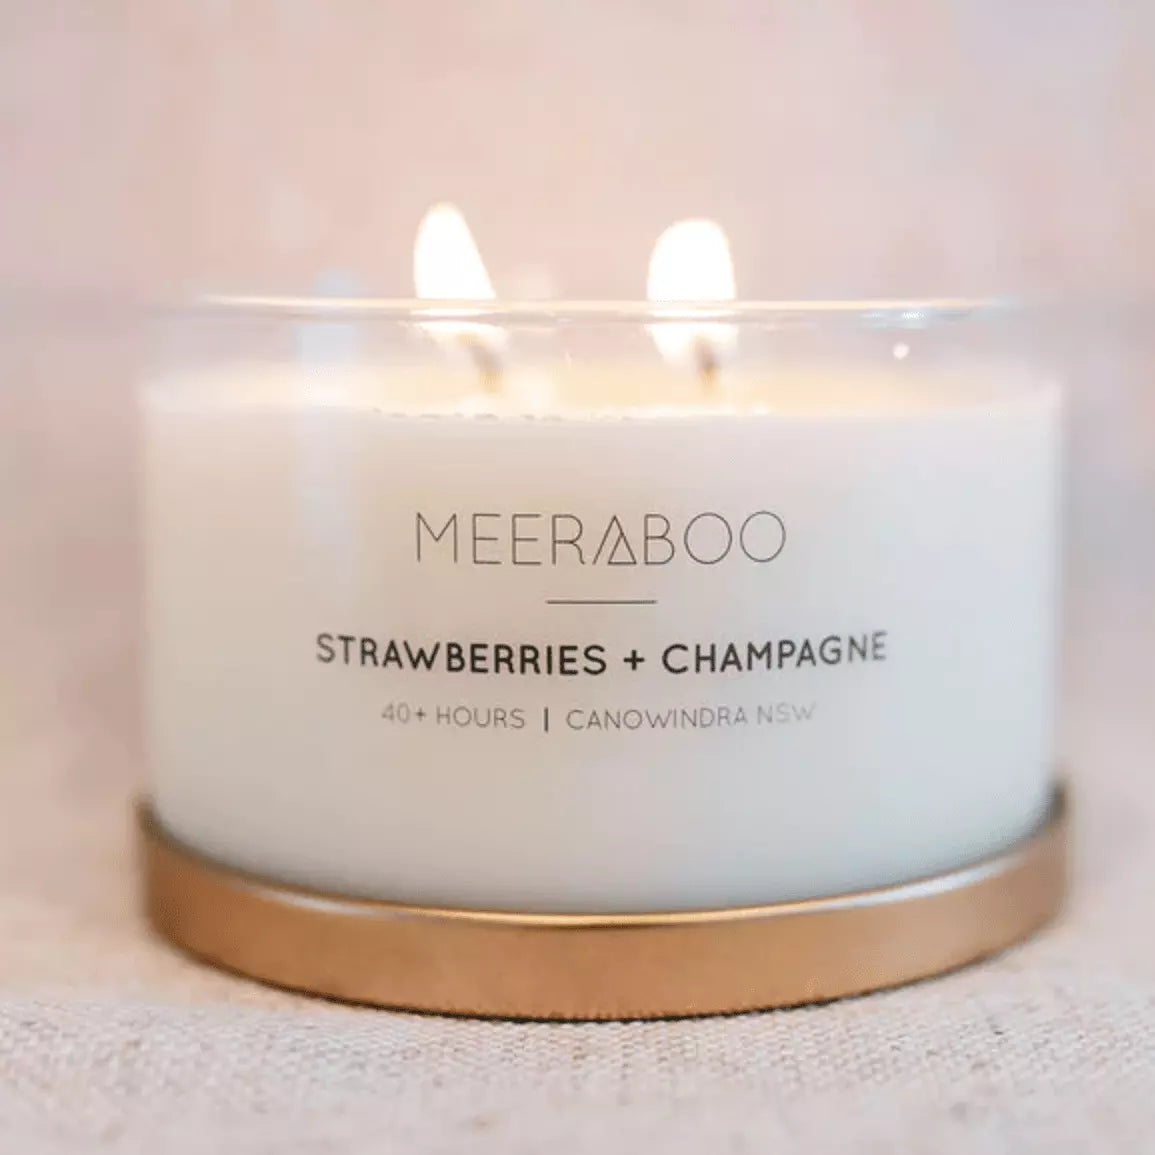 A Meeraboo Soy Candle - Strawberries and Champagne written on it.